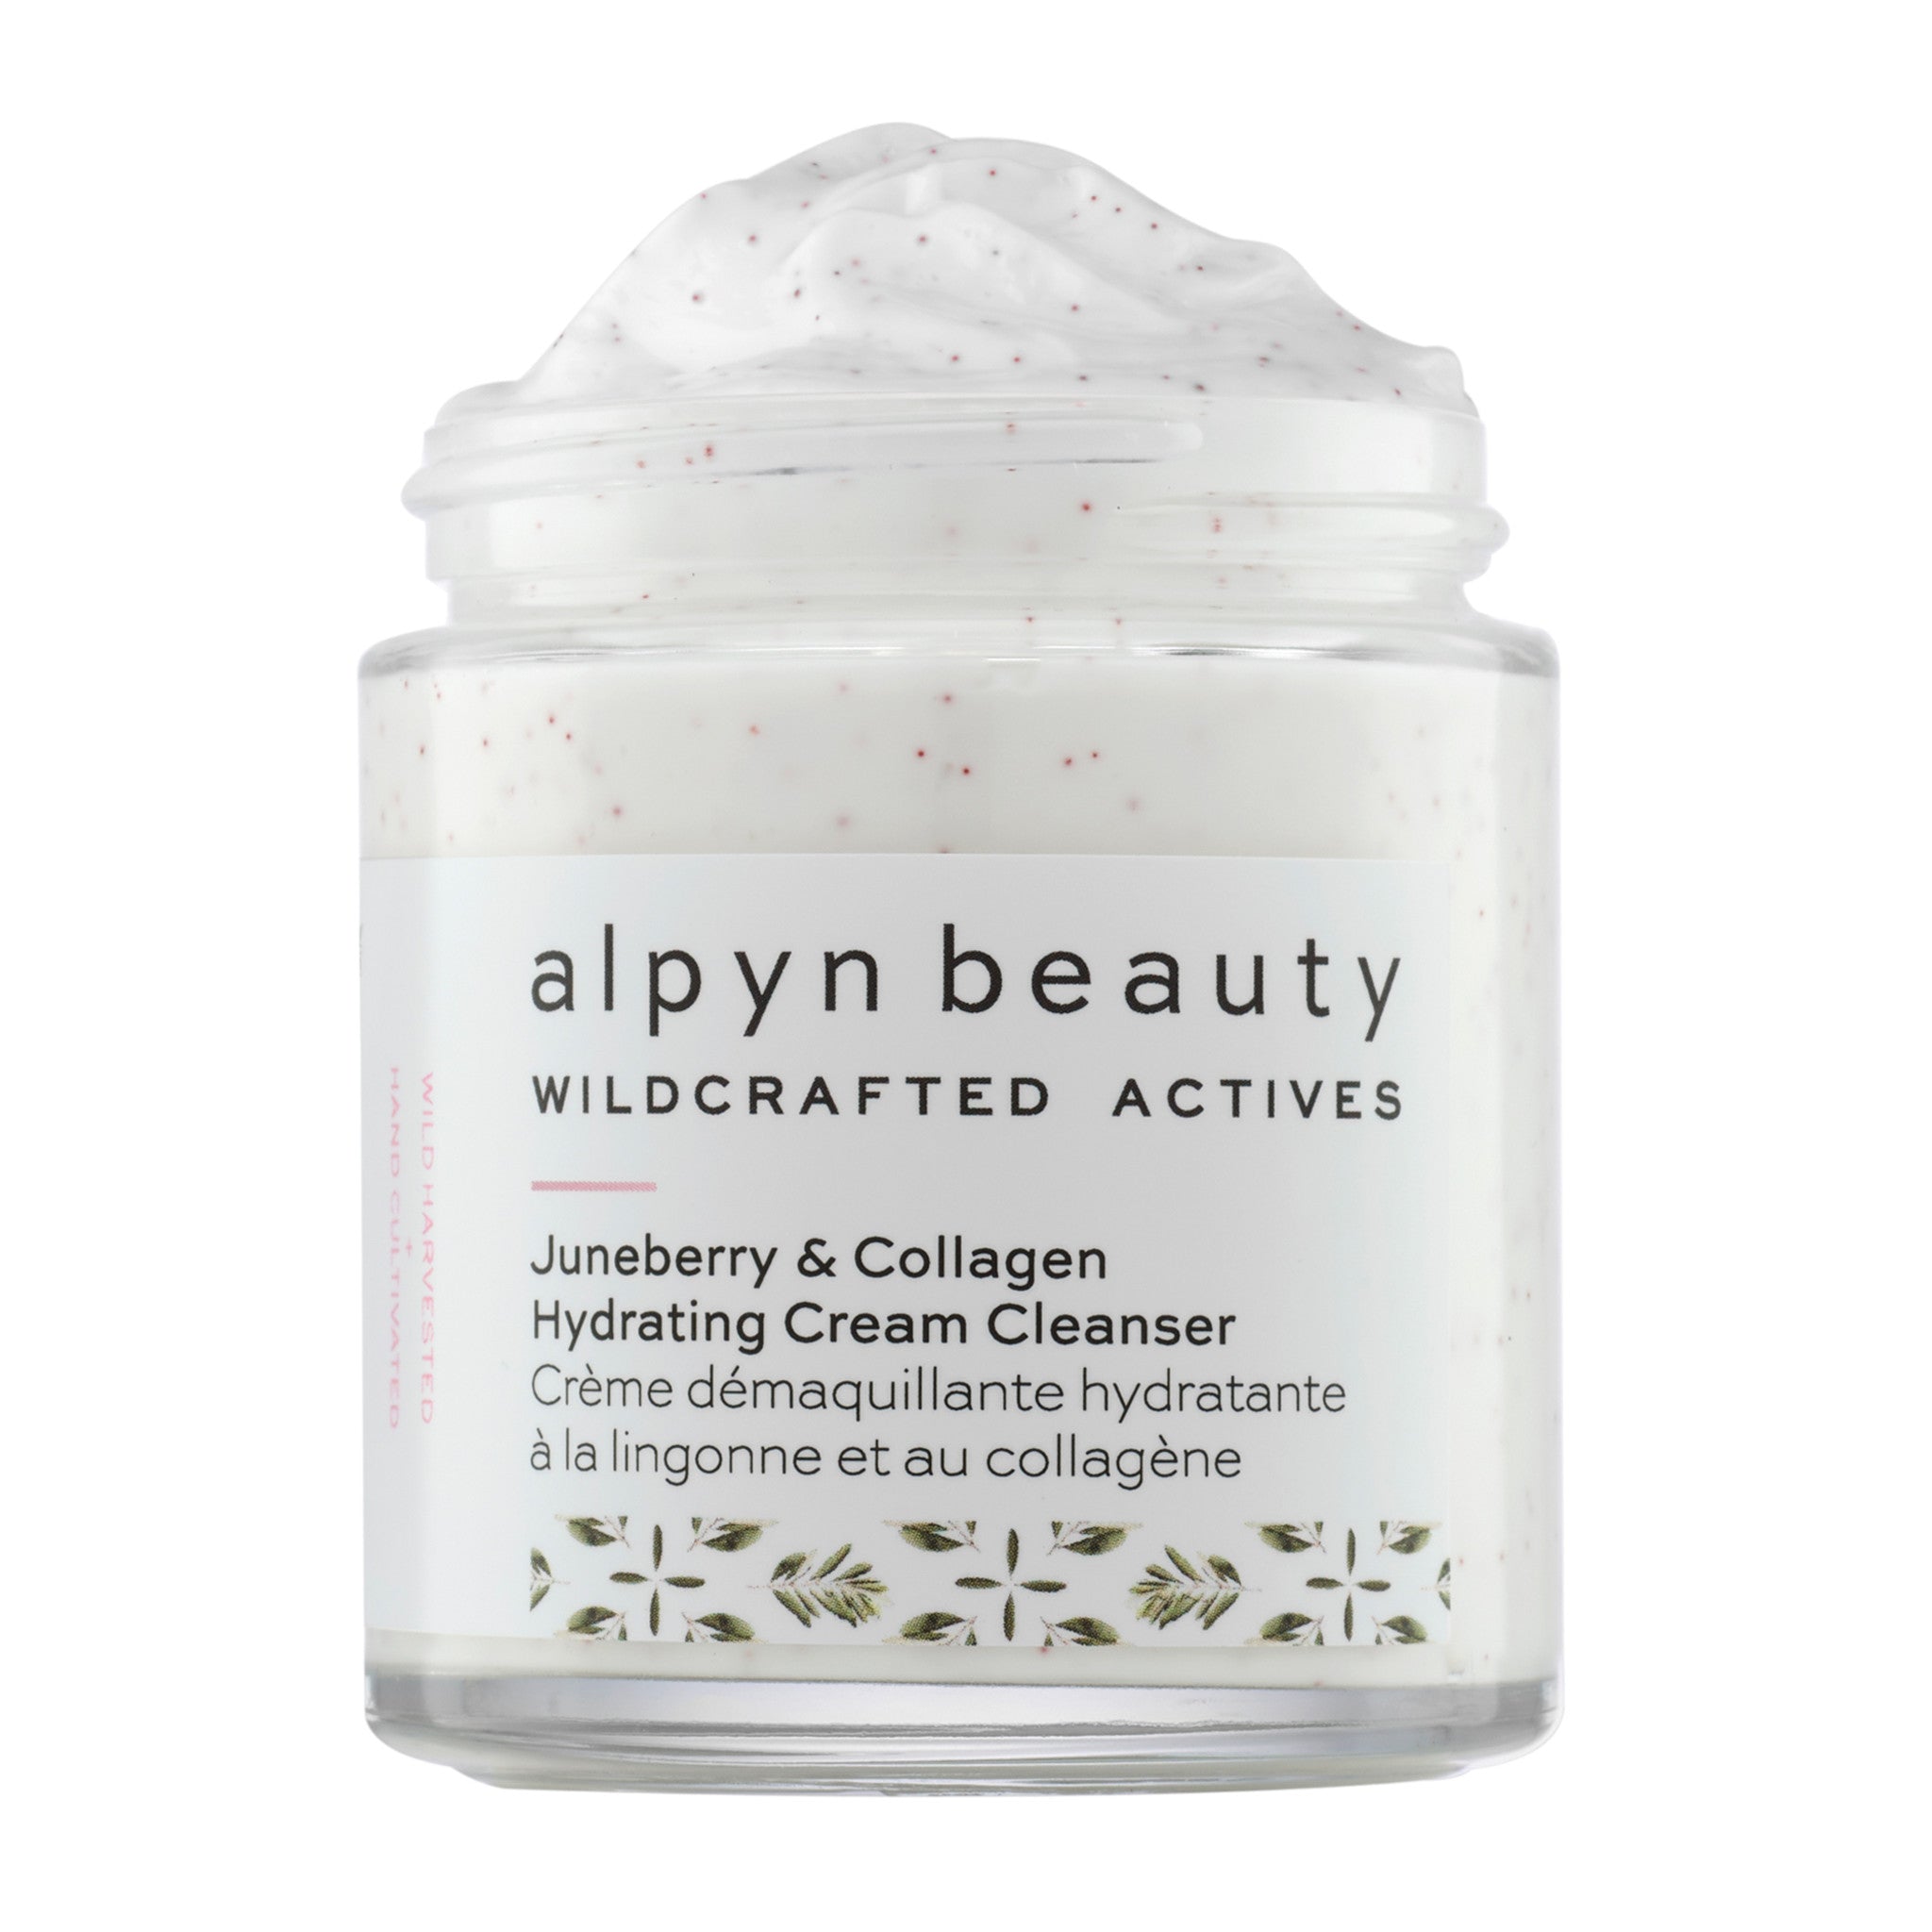 Alpyn Beauty Juneberry and Collagen Hydrating Cream Cleanser main image.